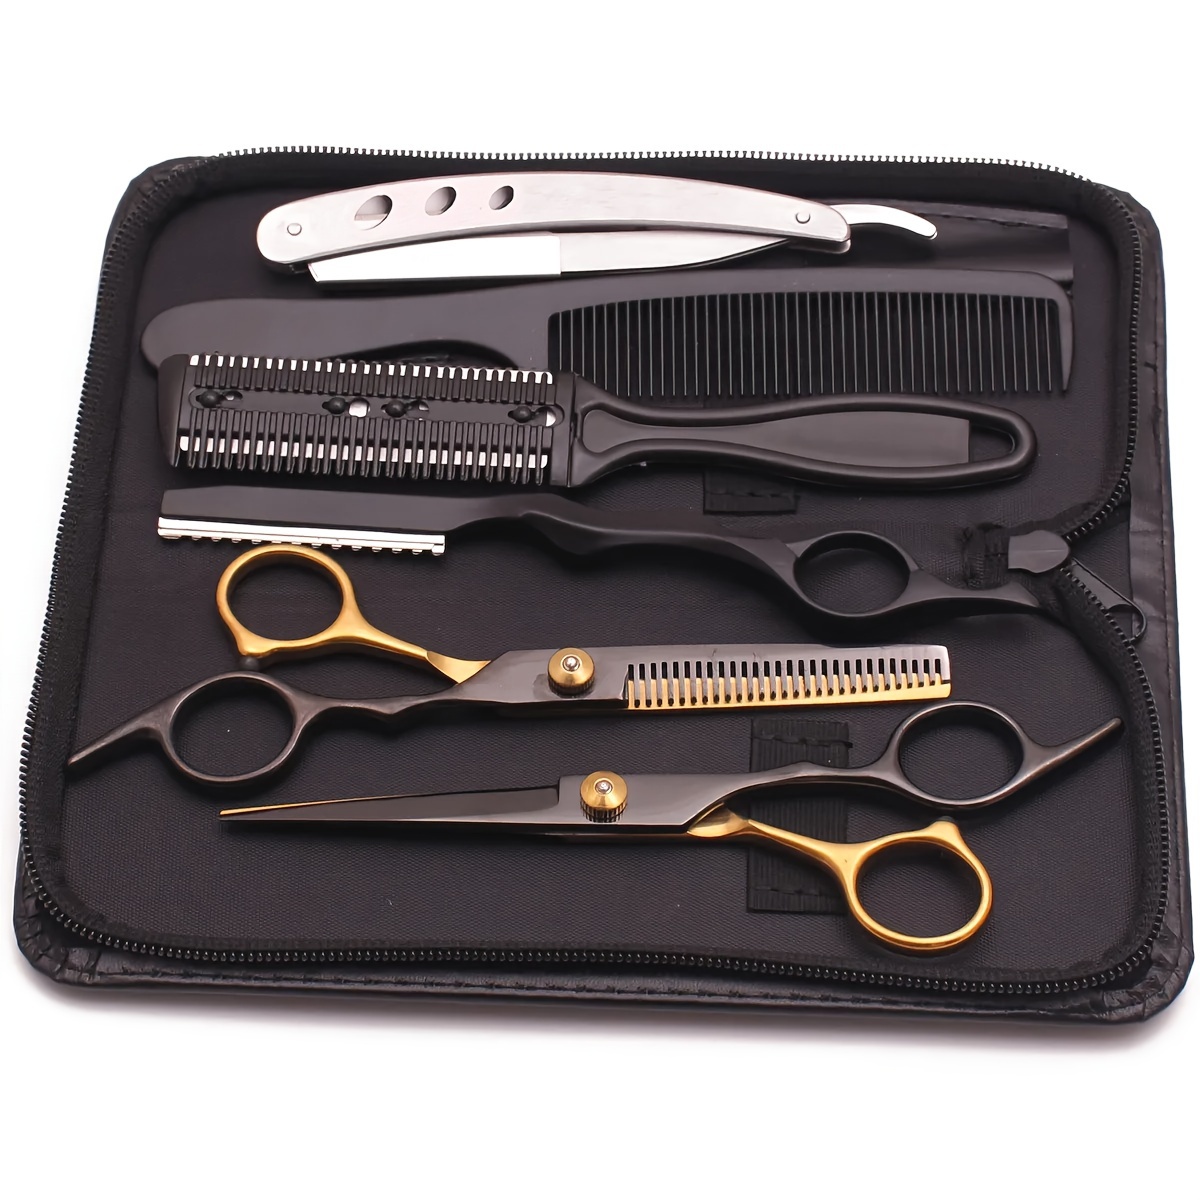 

Hairdressing Scissors Set, 6" Black Golden Hair Cutting Scissors Thinning Shears, Barber Haircut Styling Tools